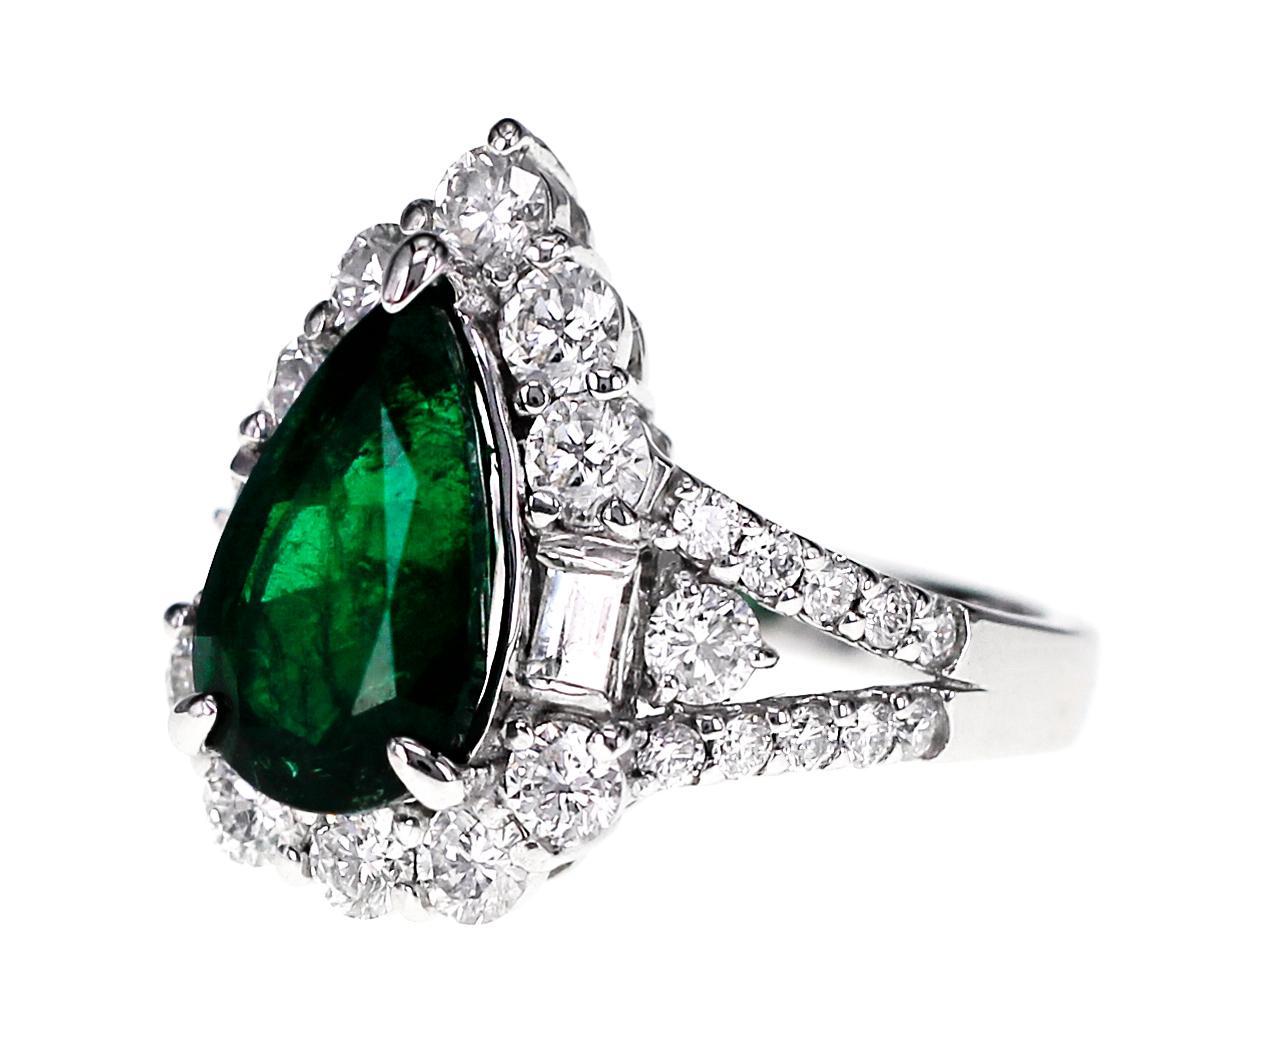 Set in Platinum ( PT 900 ), the ring is set with 2.63 carat of vivid green Zambian Emerald and 1.57 carat of D color VVS clarity diamond.
Ring Size: US 6